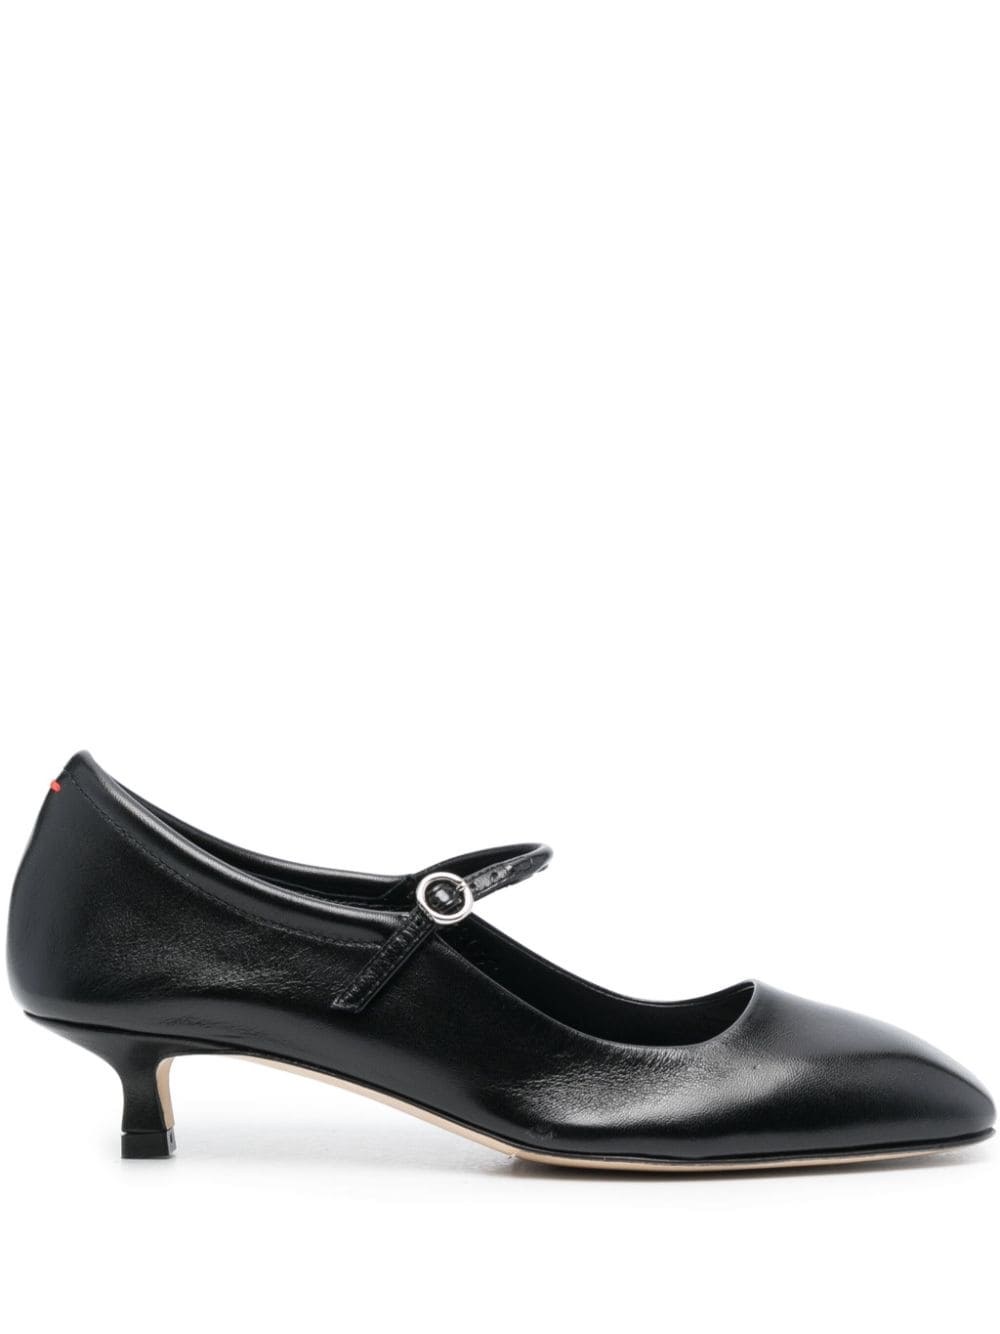 Ines 40mm leather pumps